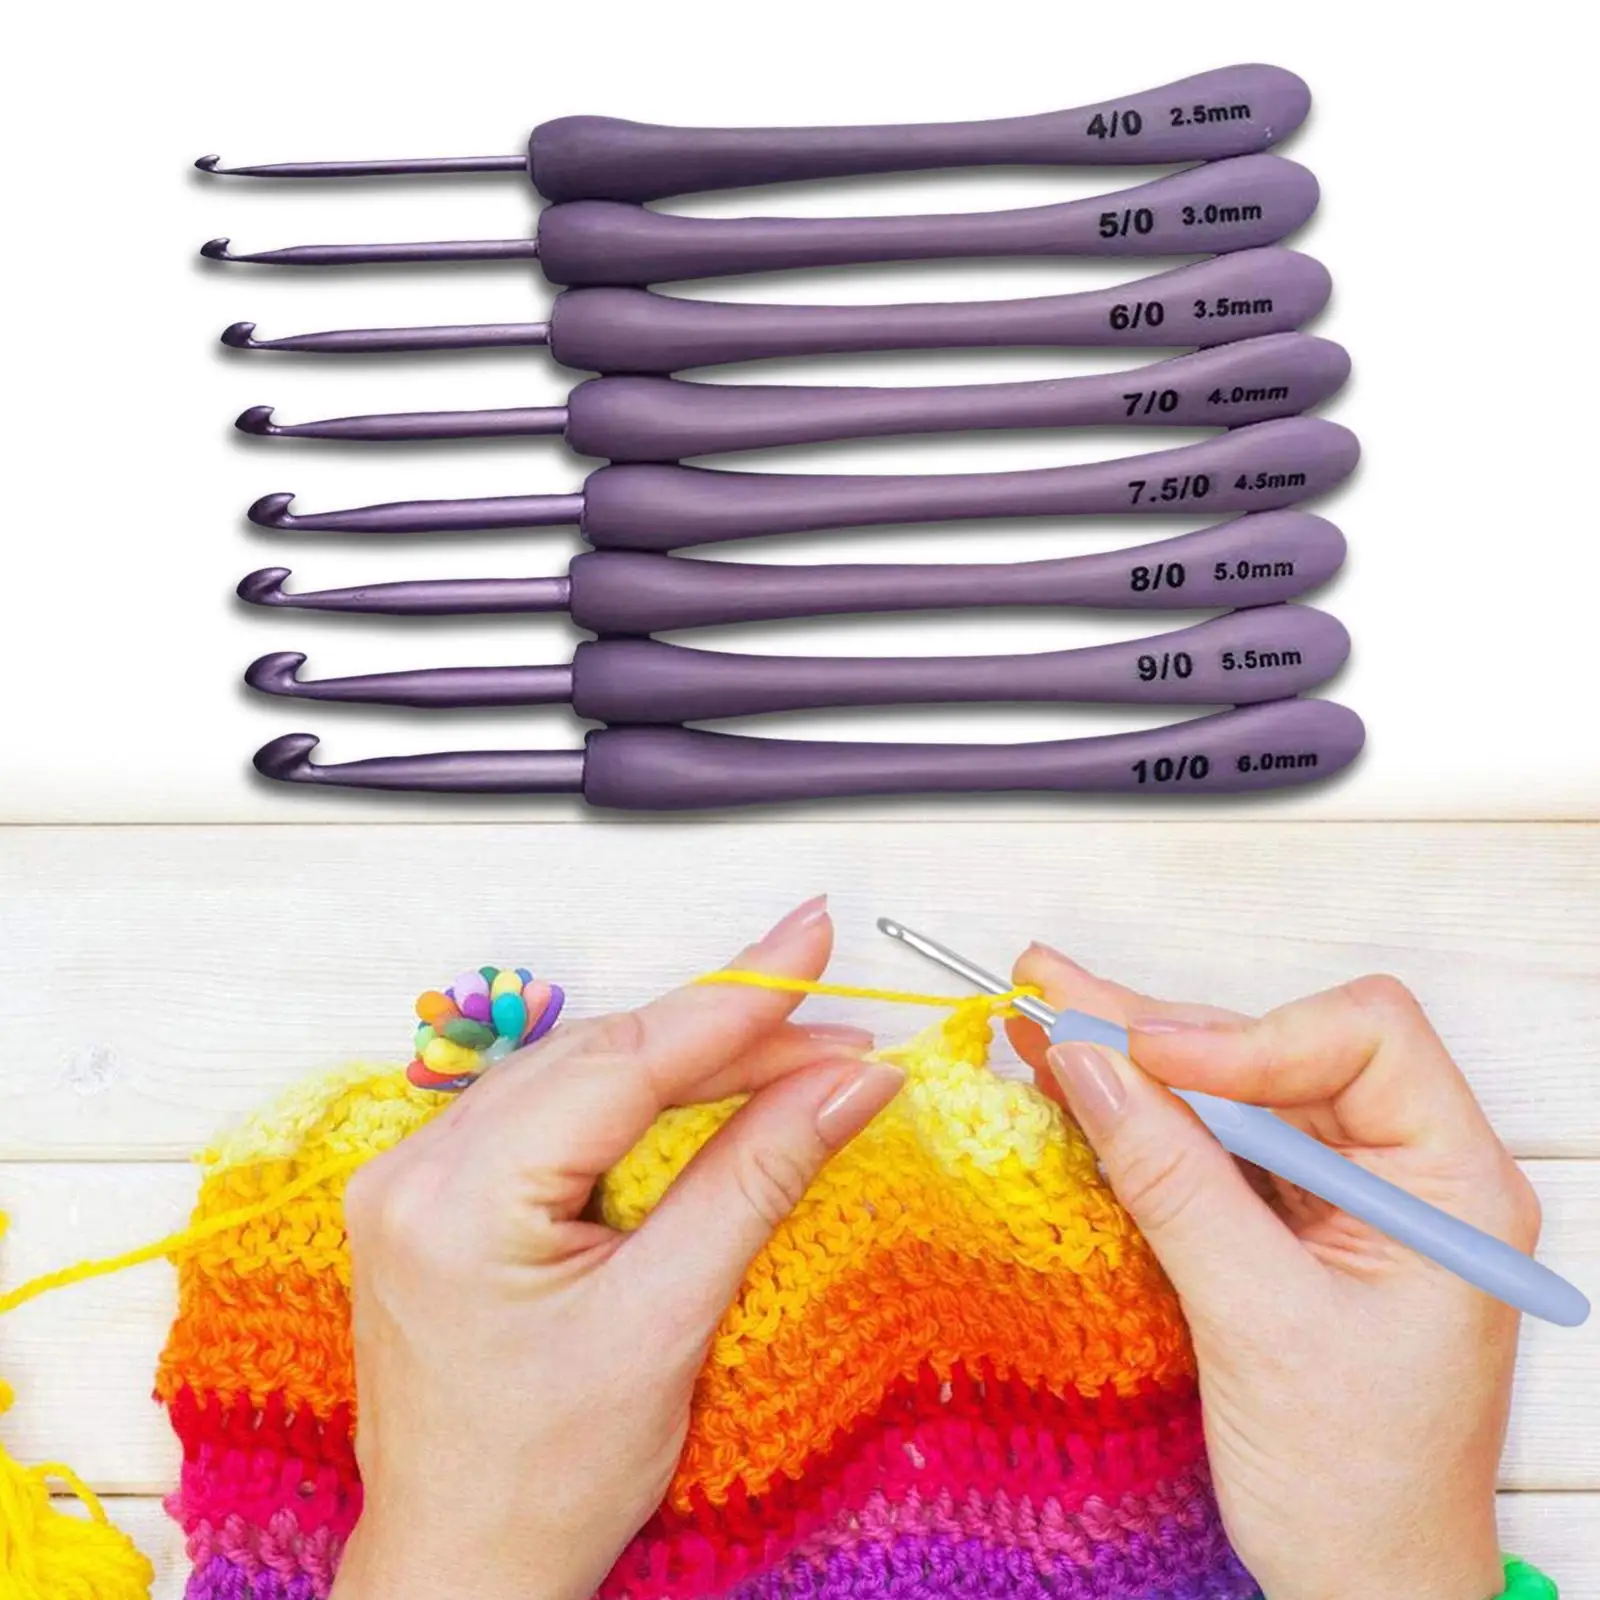 Crochet Needles Set 8 Different Size 2.5mm - 6mm Accessory Crochet Hooks for DIY Craft Handmade Sweaters Gloves Knitting Tools